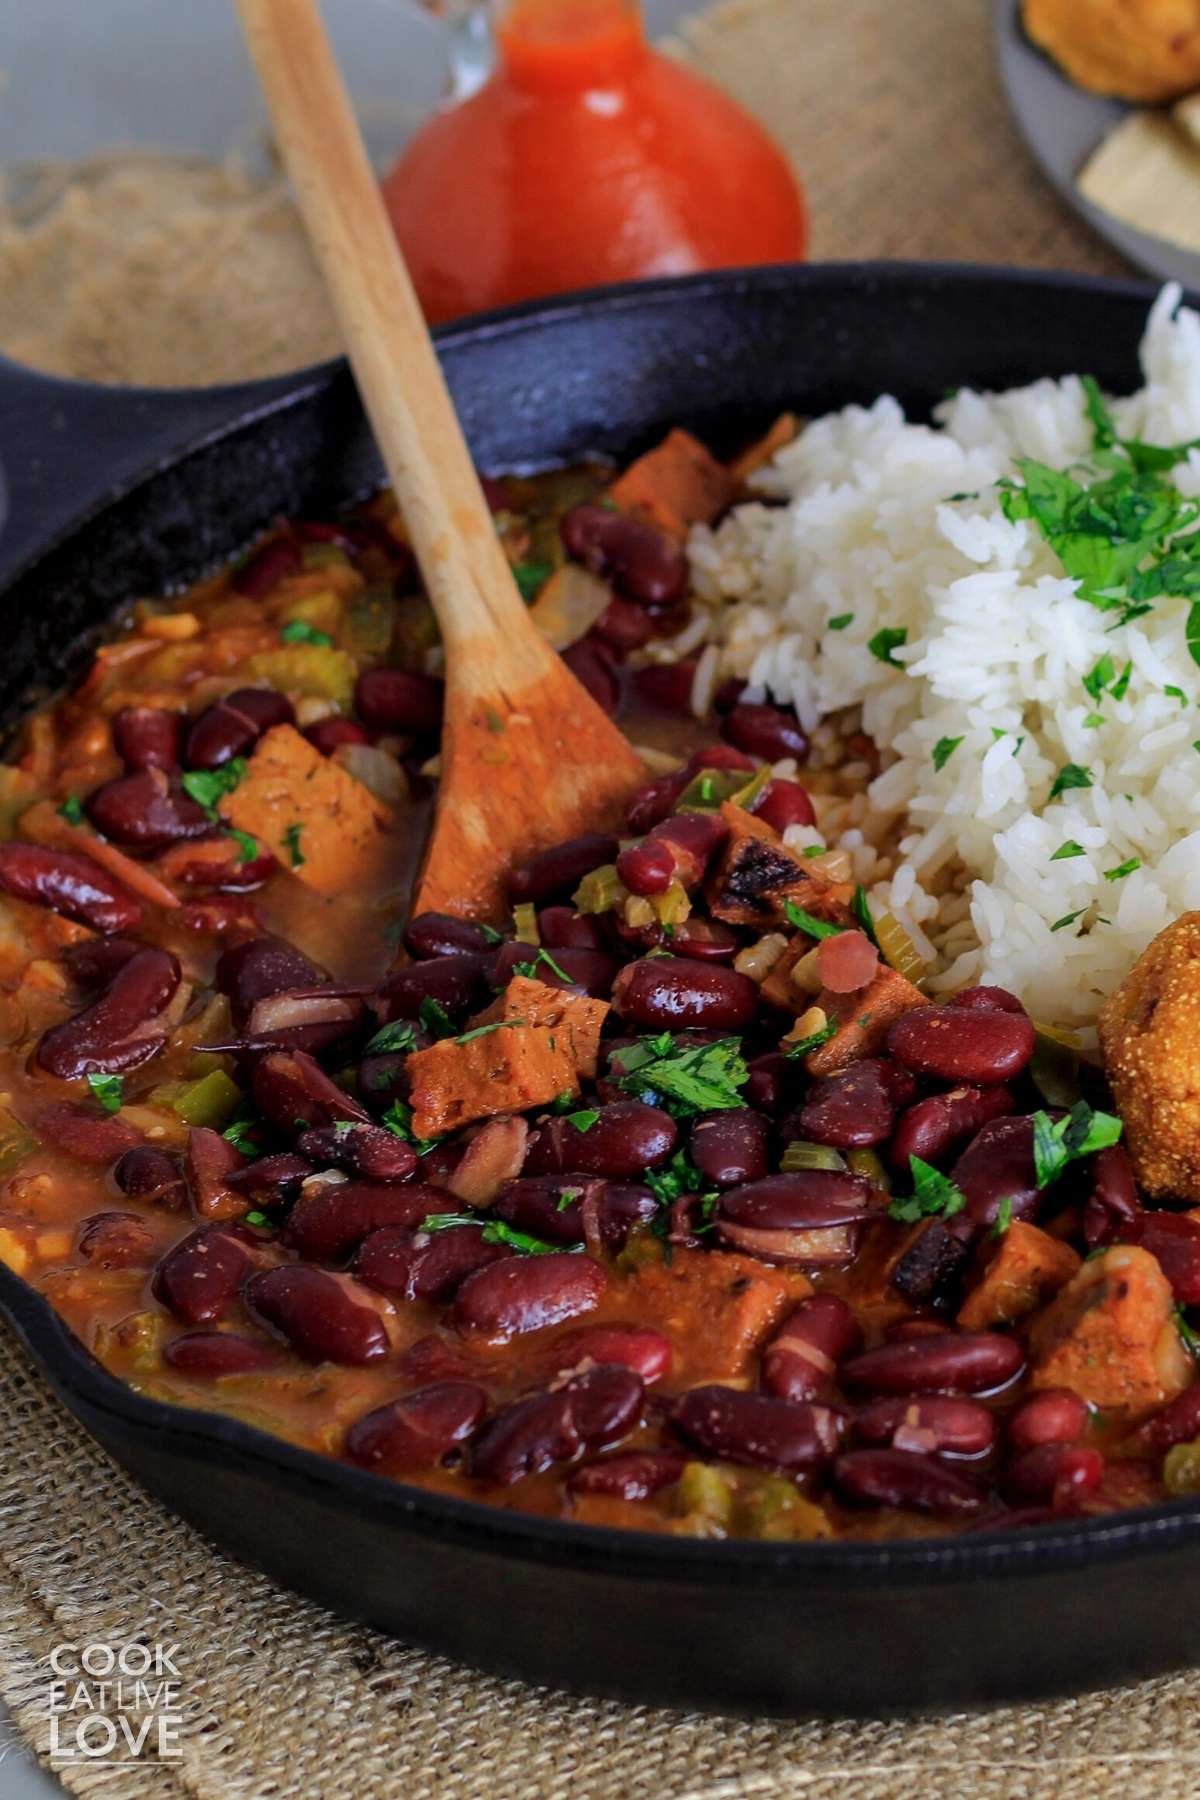 Skillet with red beans and rice on the table with wooden spoon in the dish.